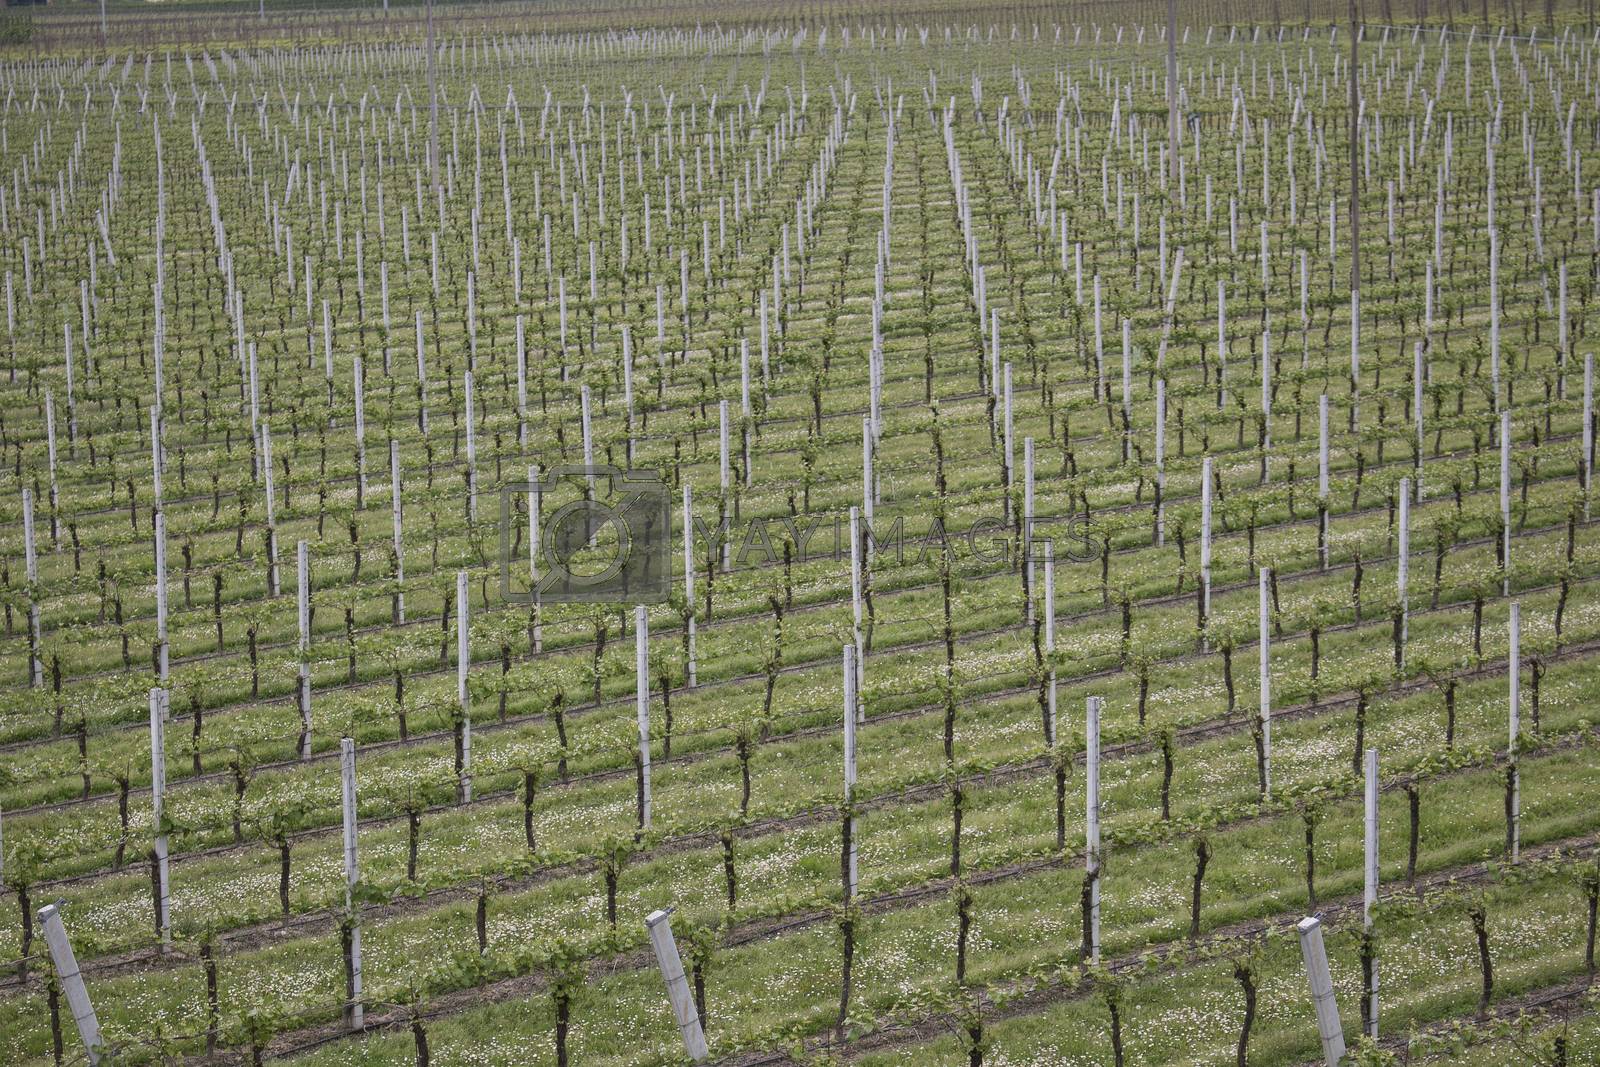 Royalty free image of rows of vines by paocasa